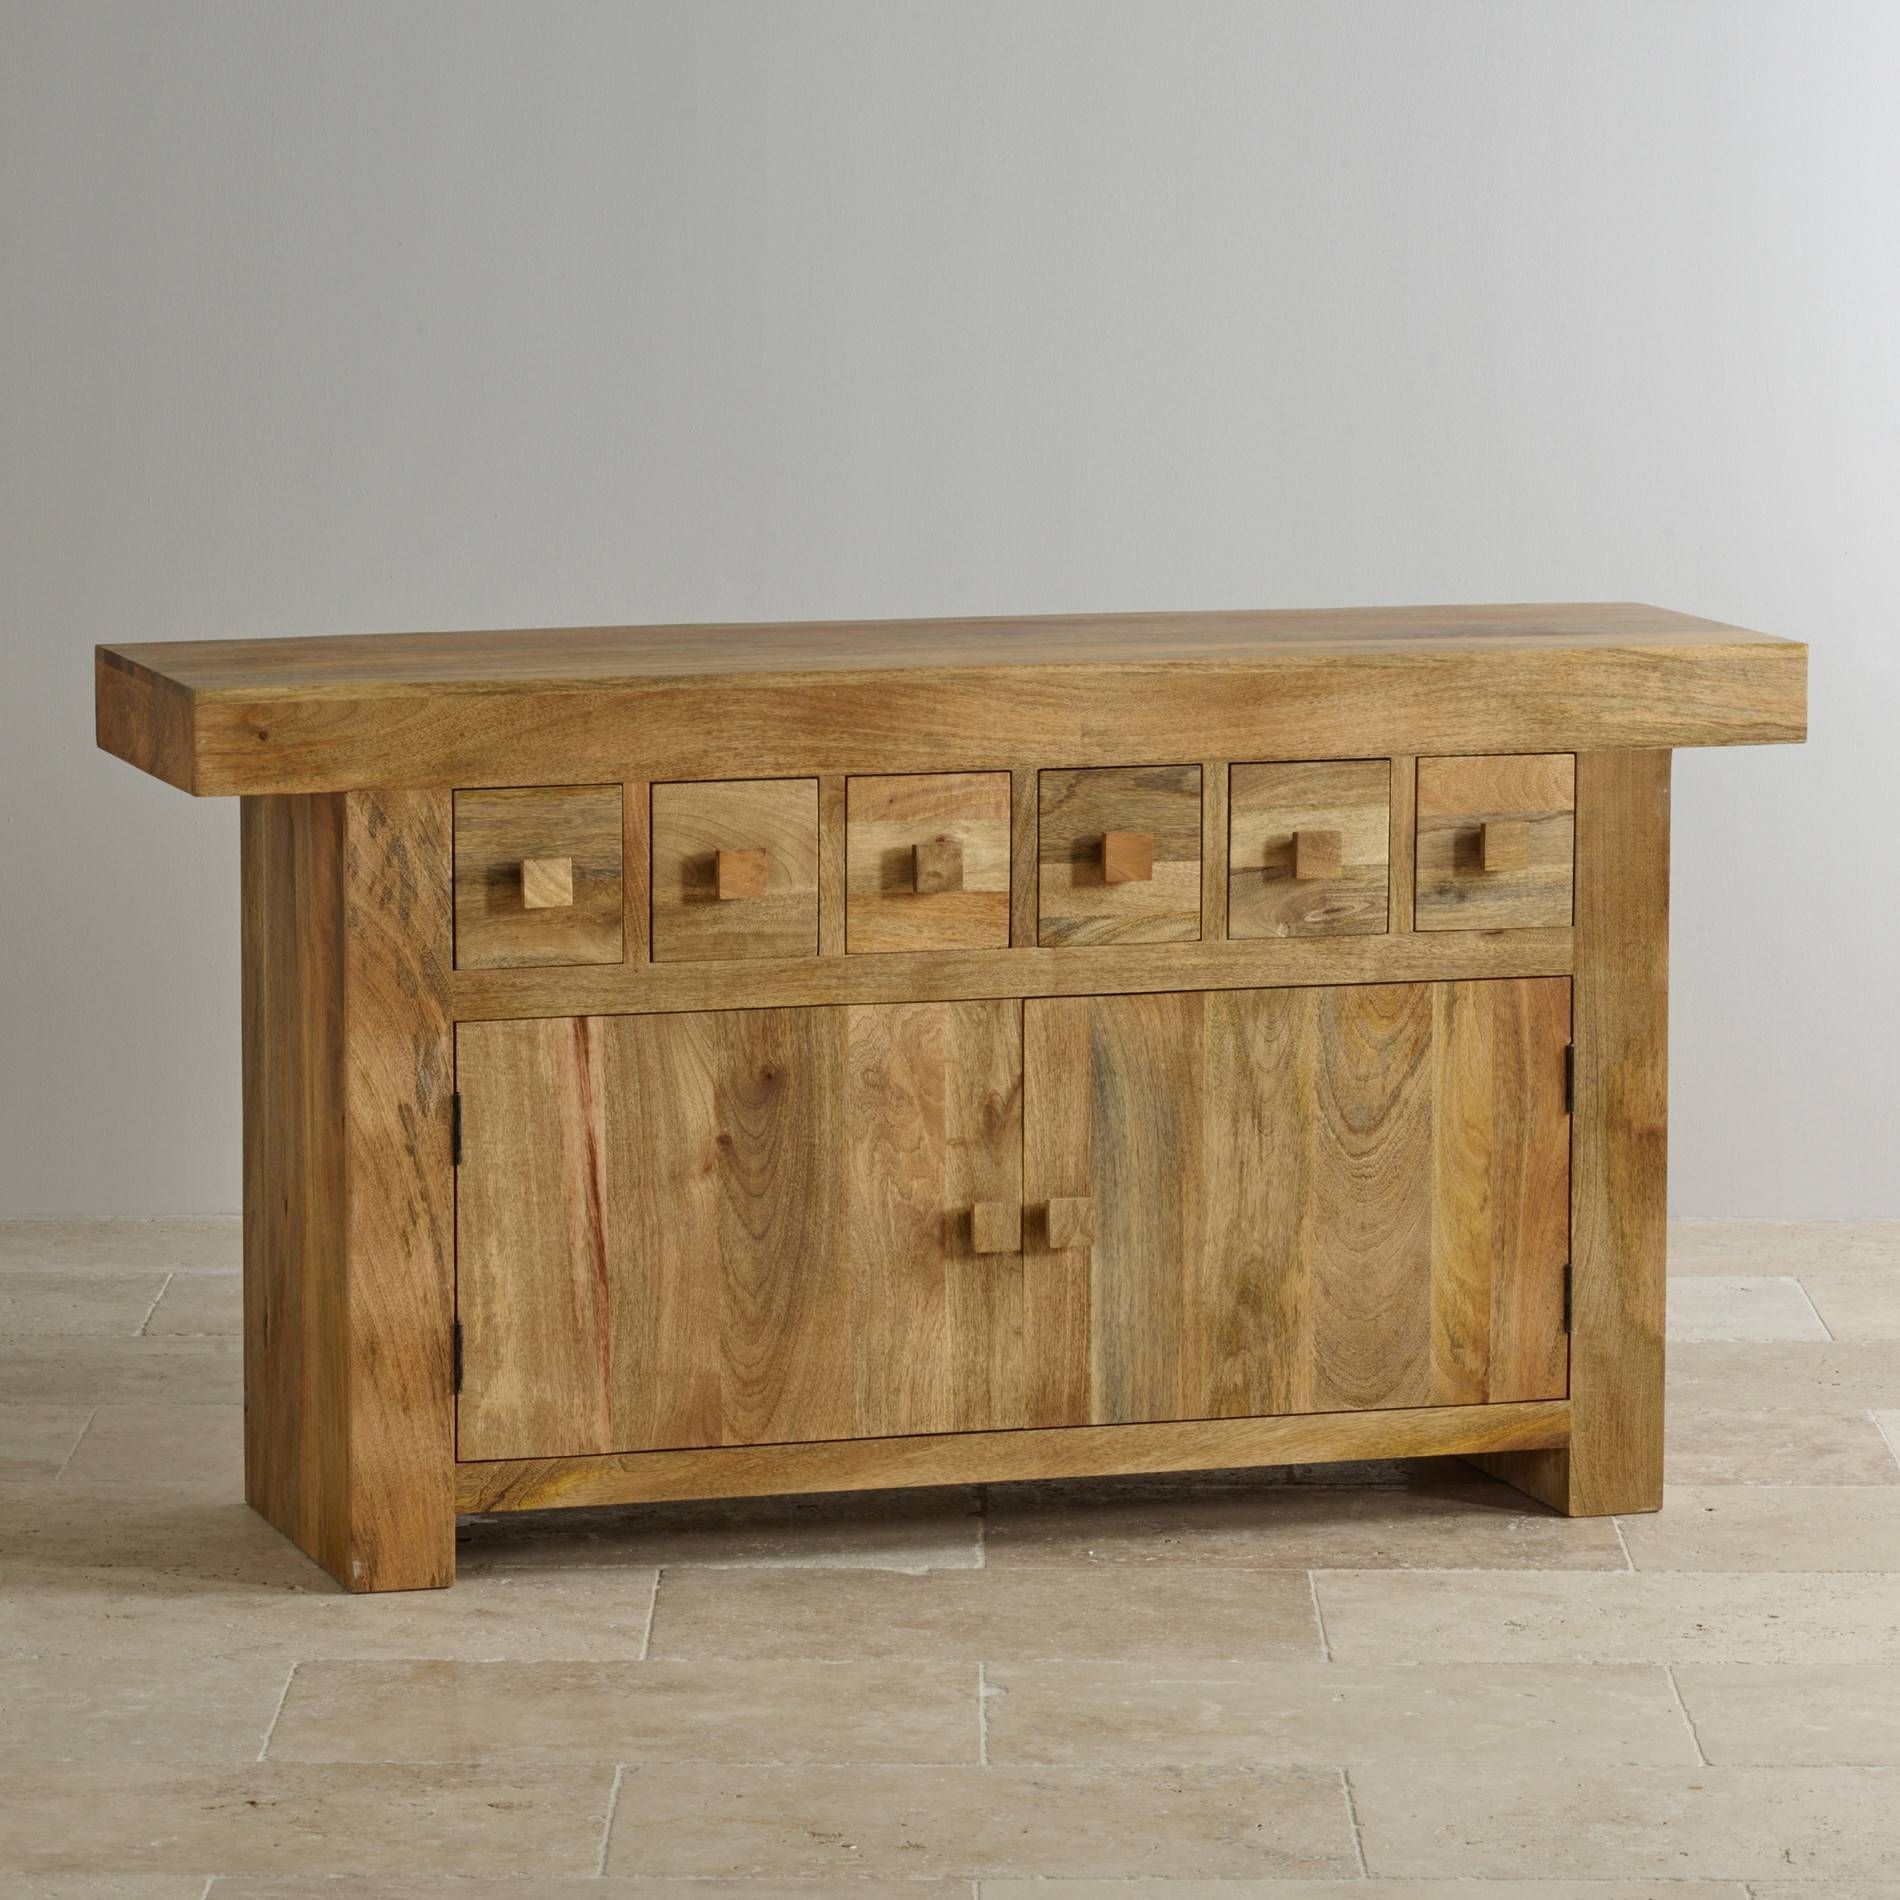 View Sideboard Oak Furniture Good Home Design Fancy At Sideboard Pertaining To 2018 Oak Furniture Sideboards (View 12 of 15)